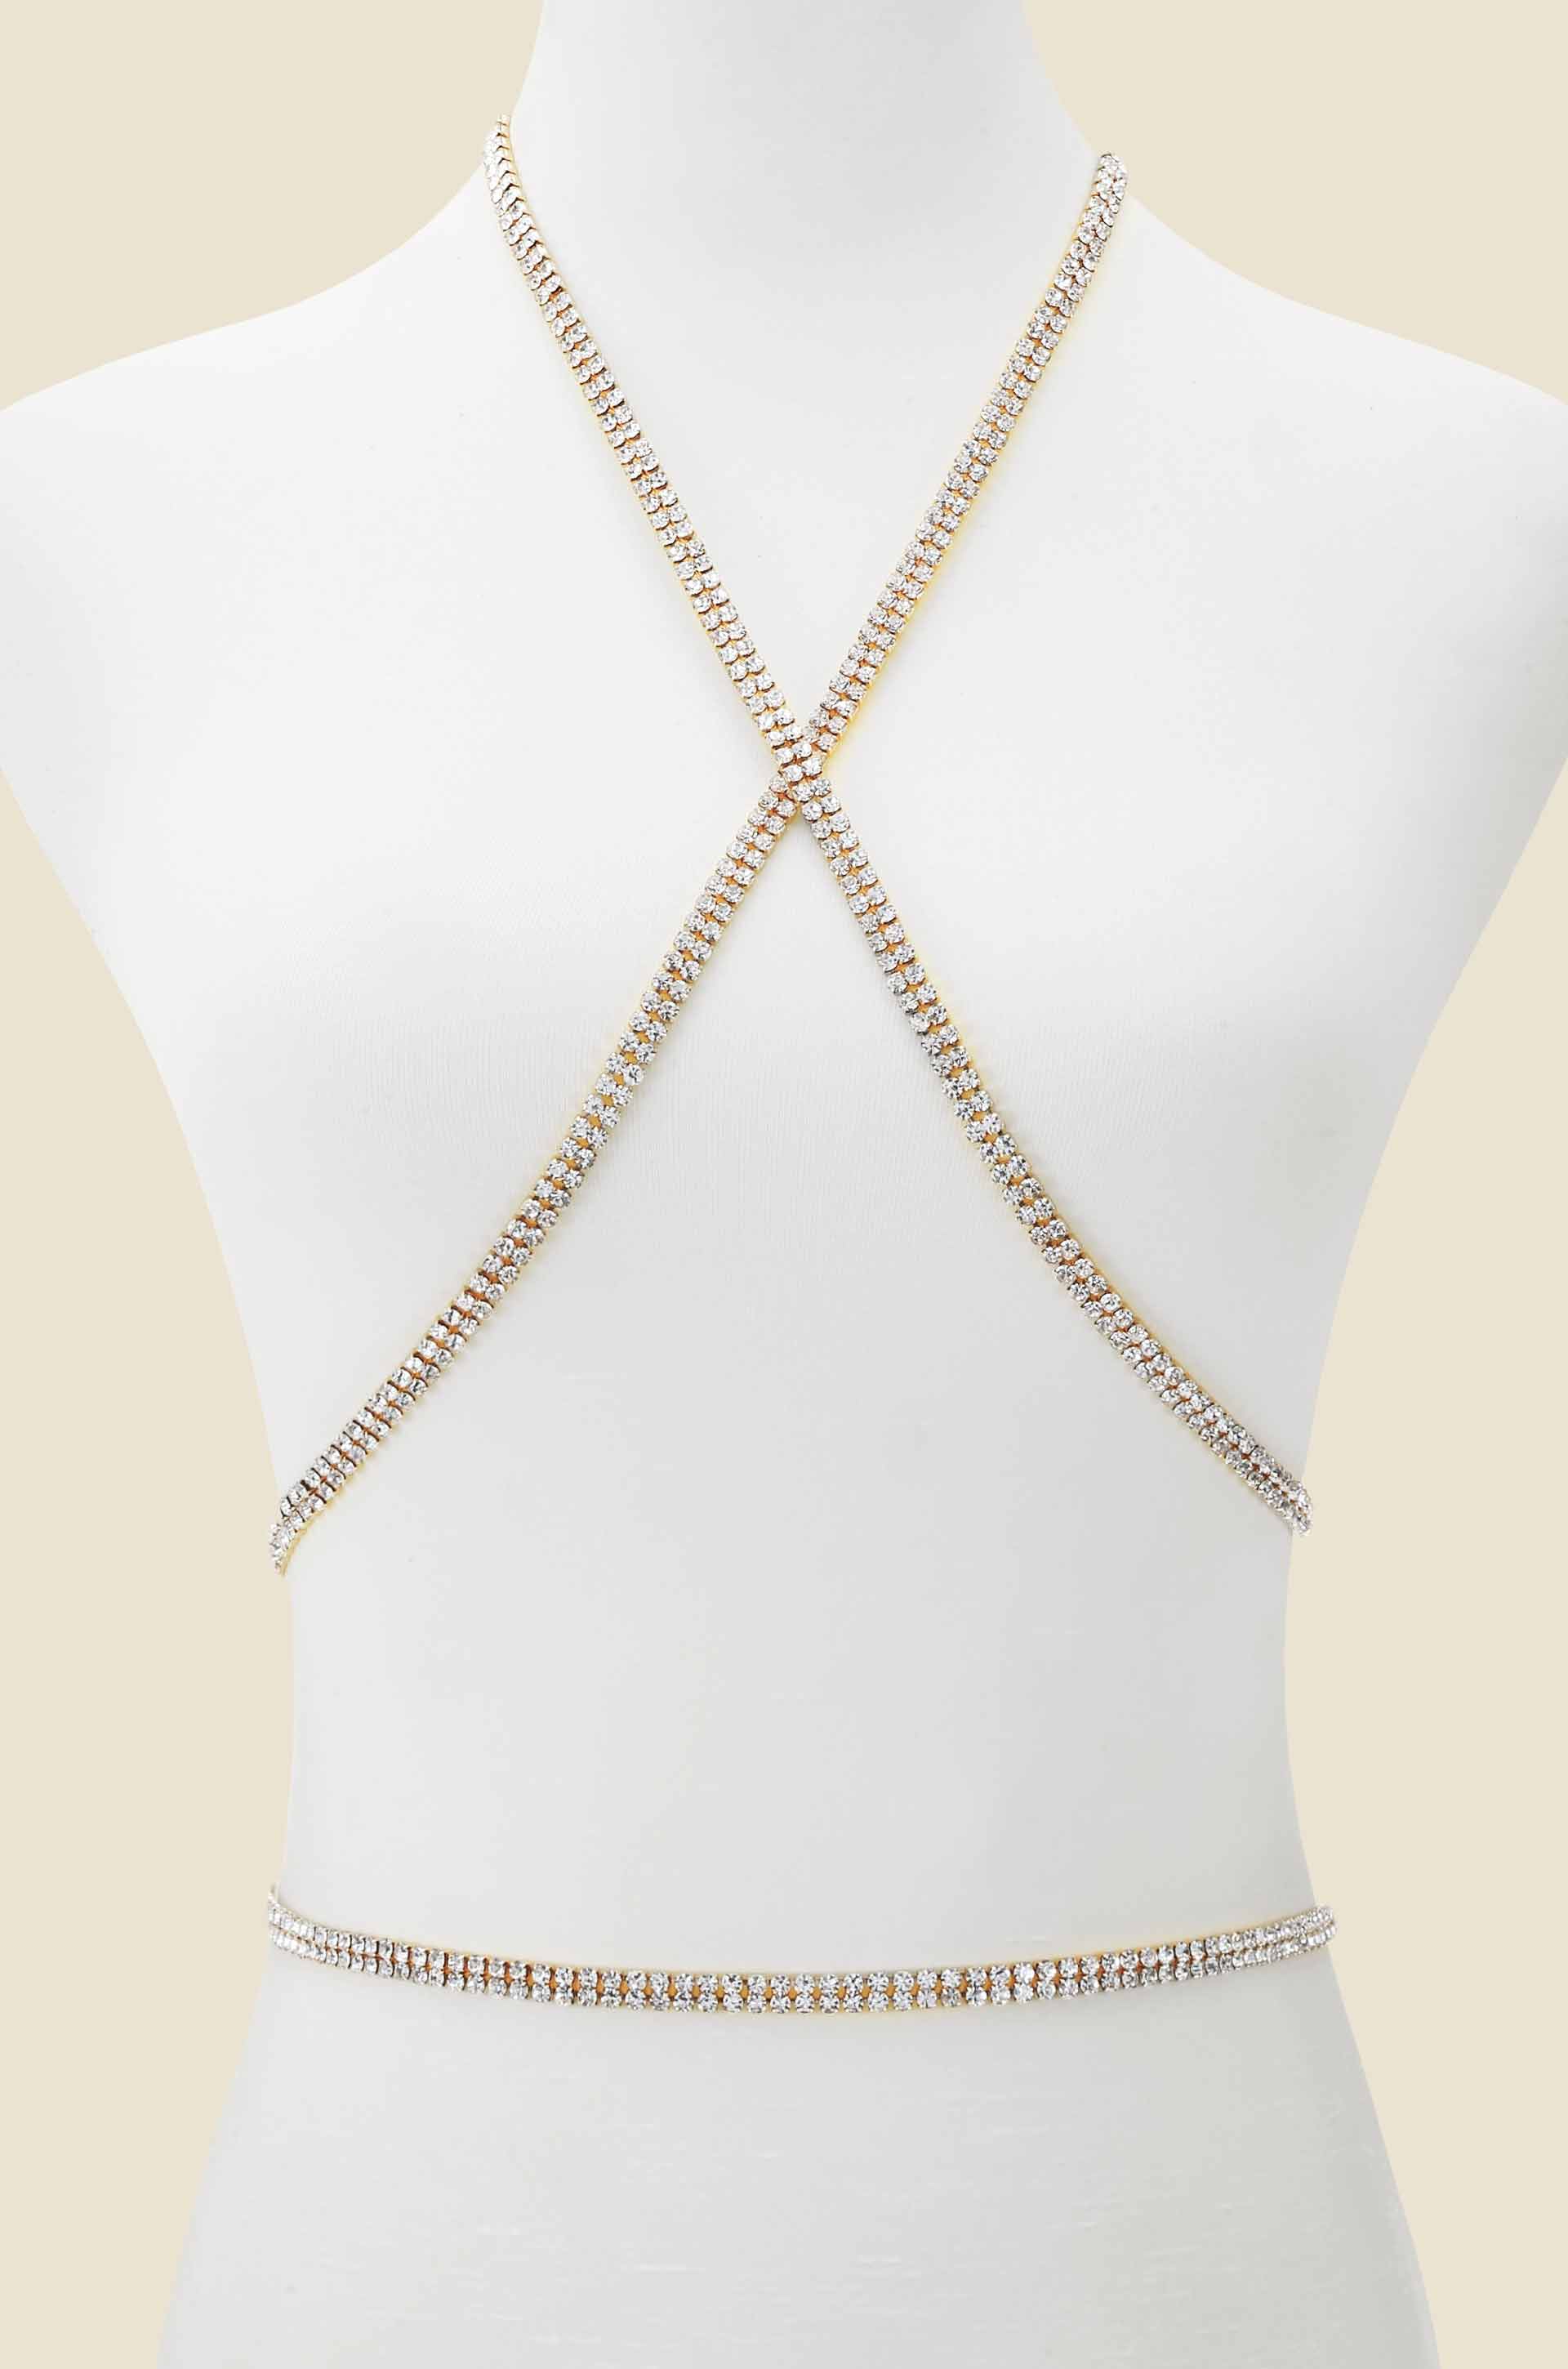 Wrapped Up in Crystal Body Chain on slate